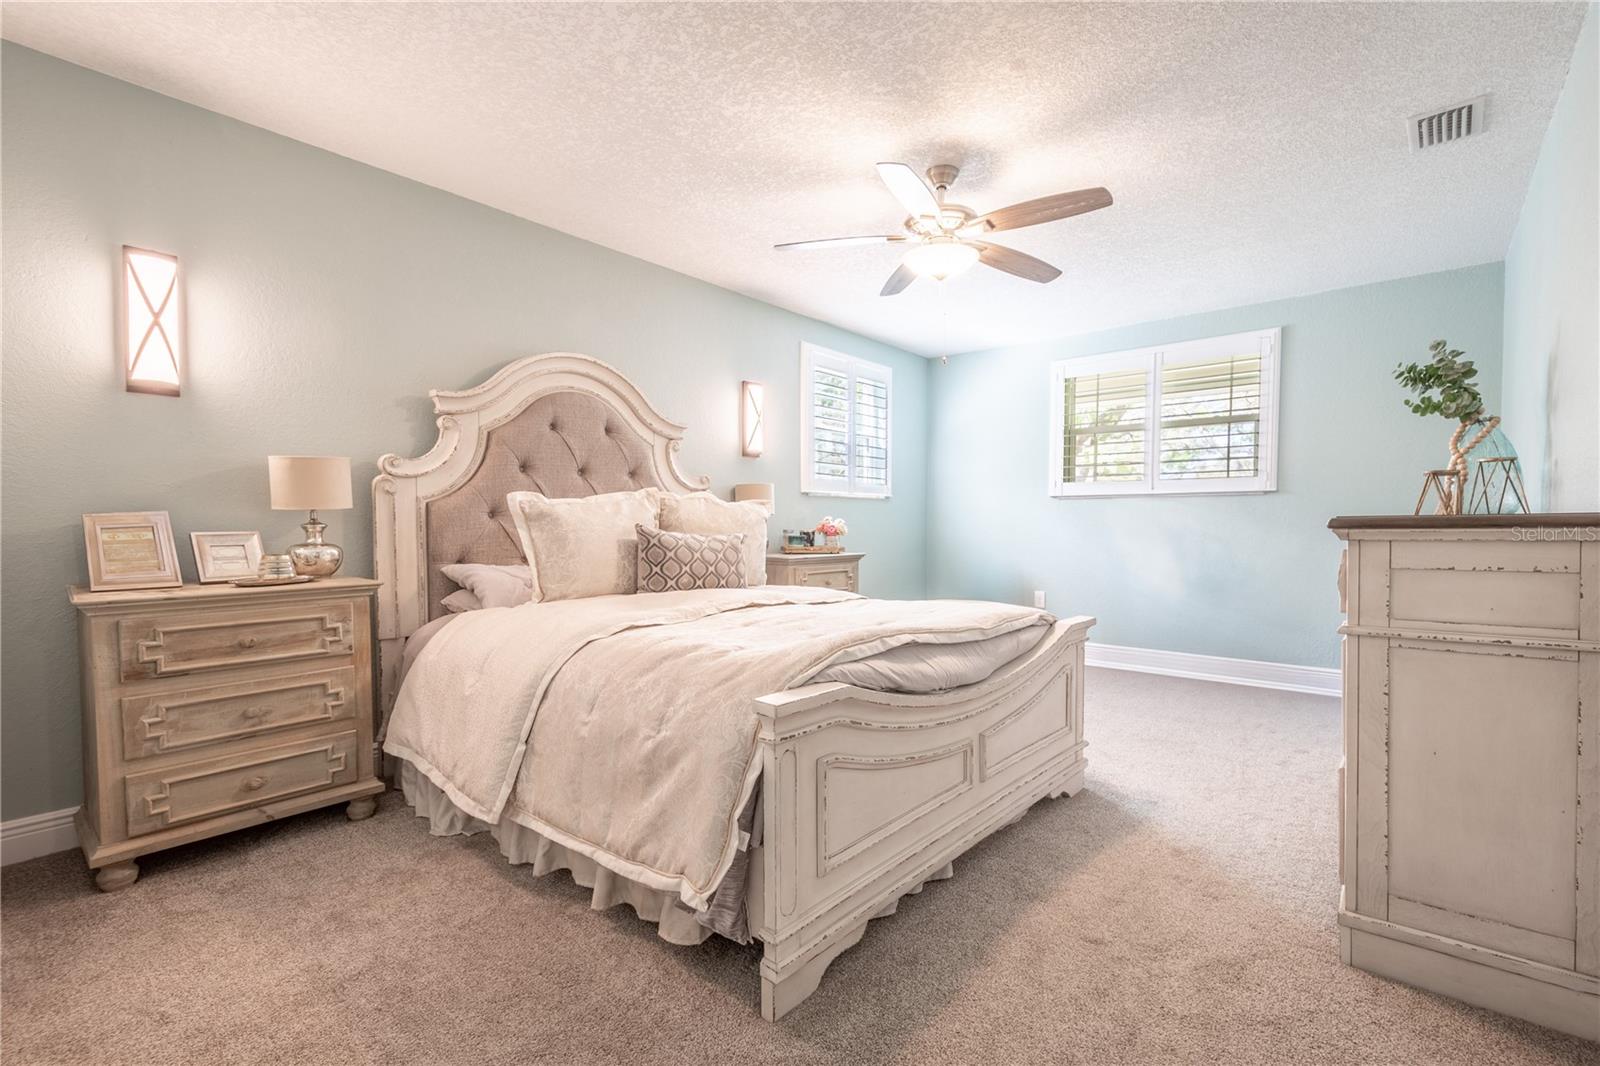 The upstairs primary bedroom features plantation shutters, plush carpeting and an ensuite bath.